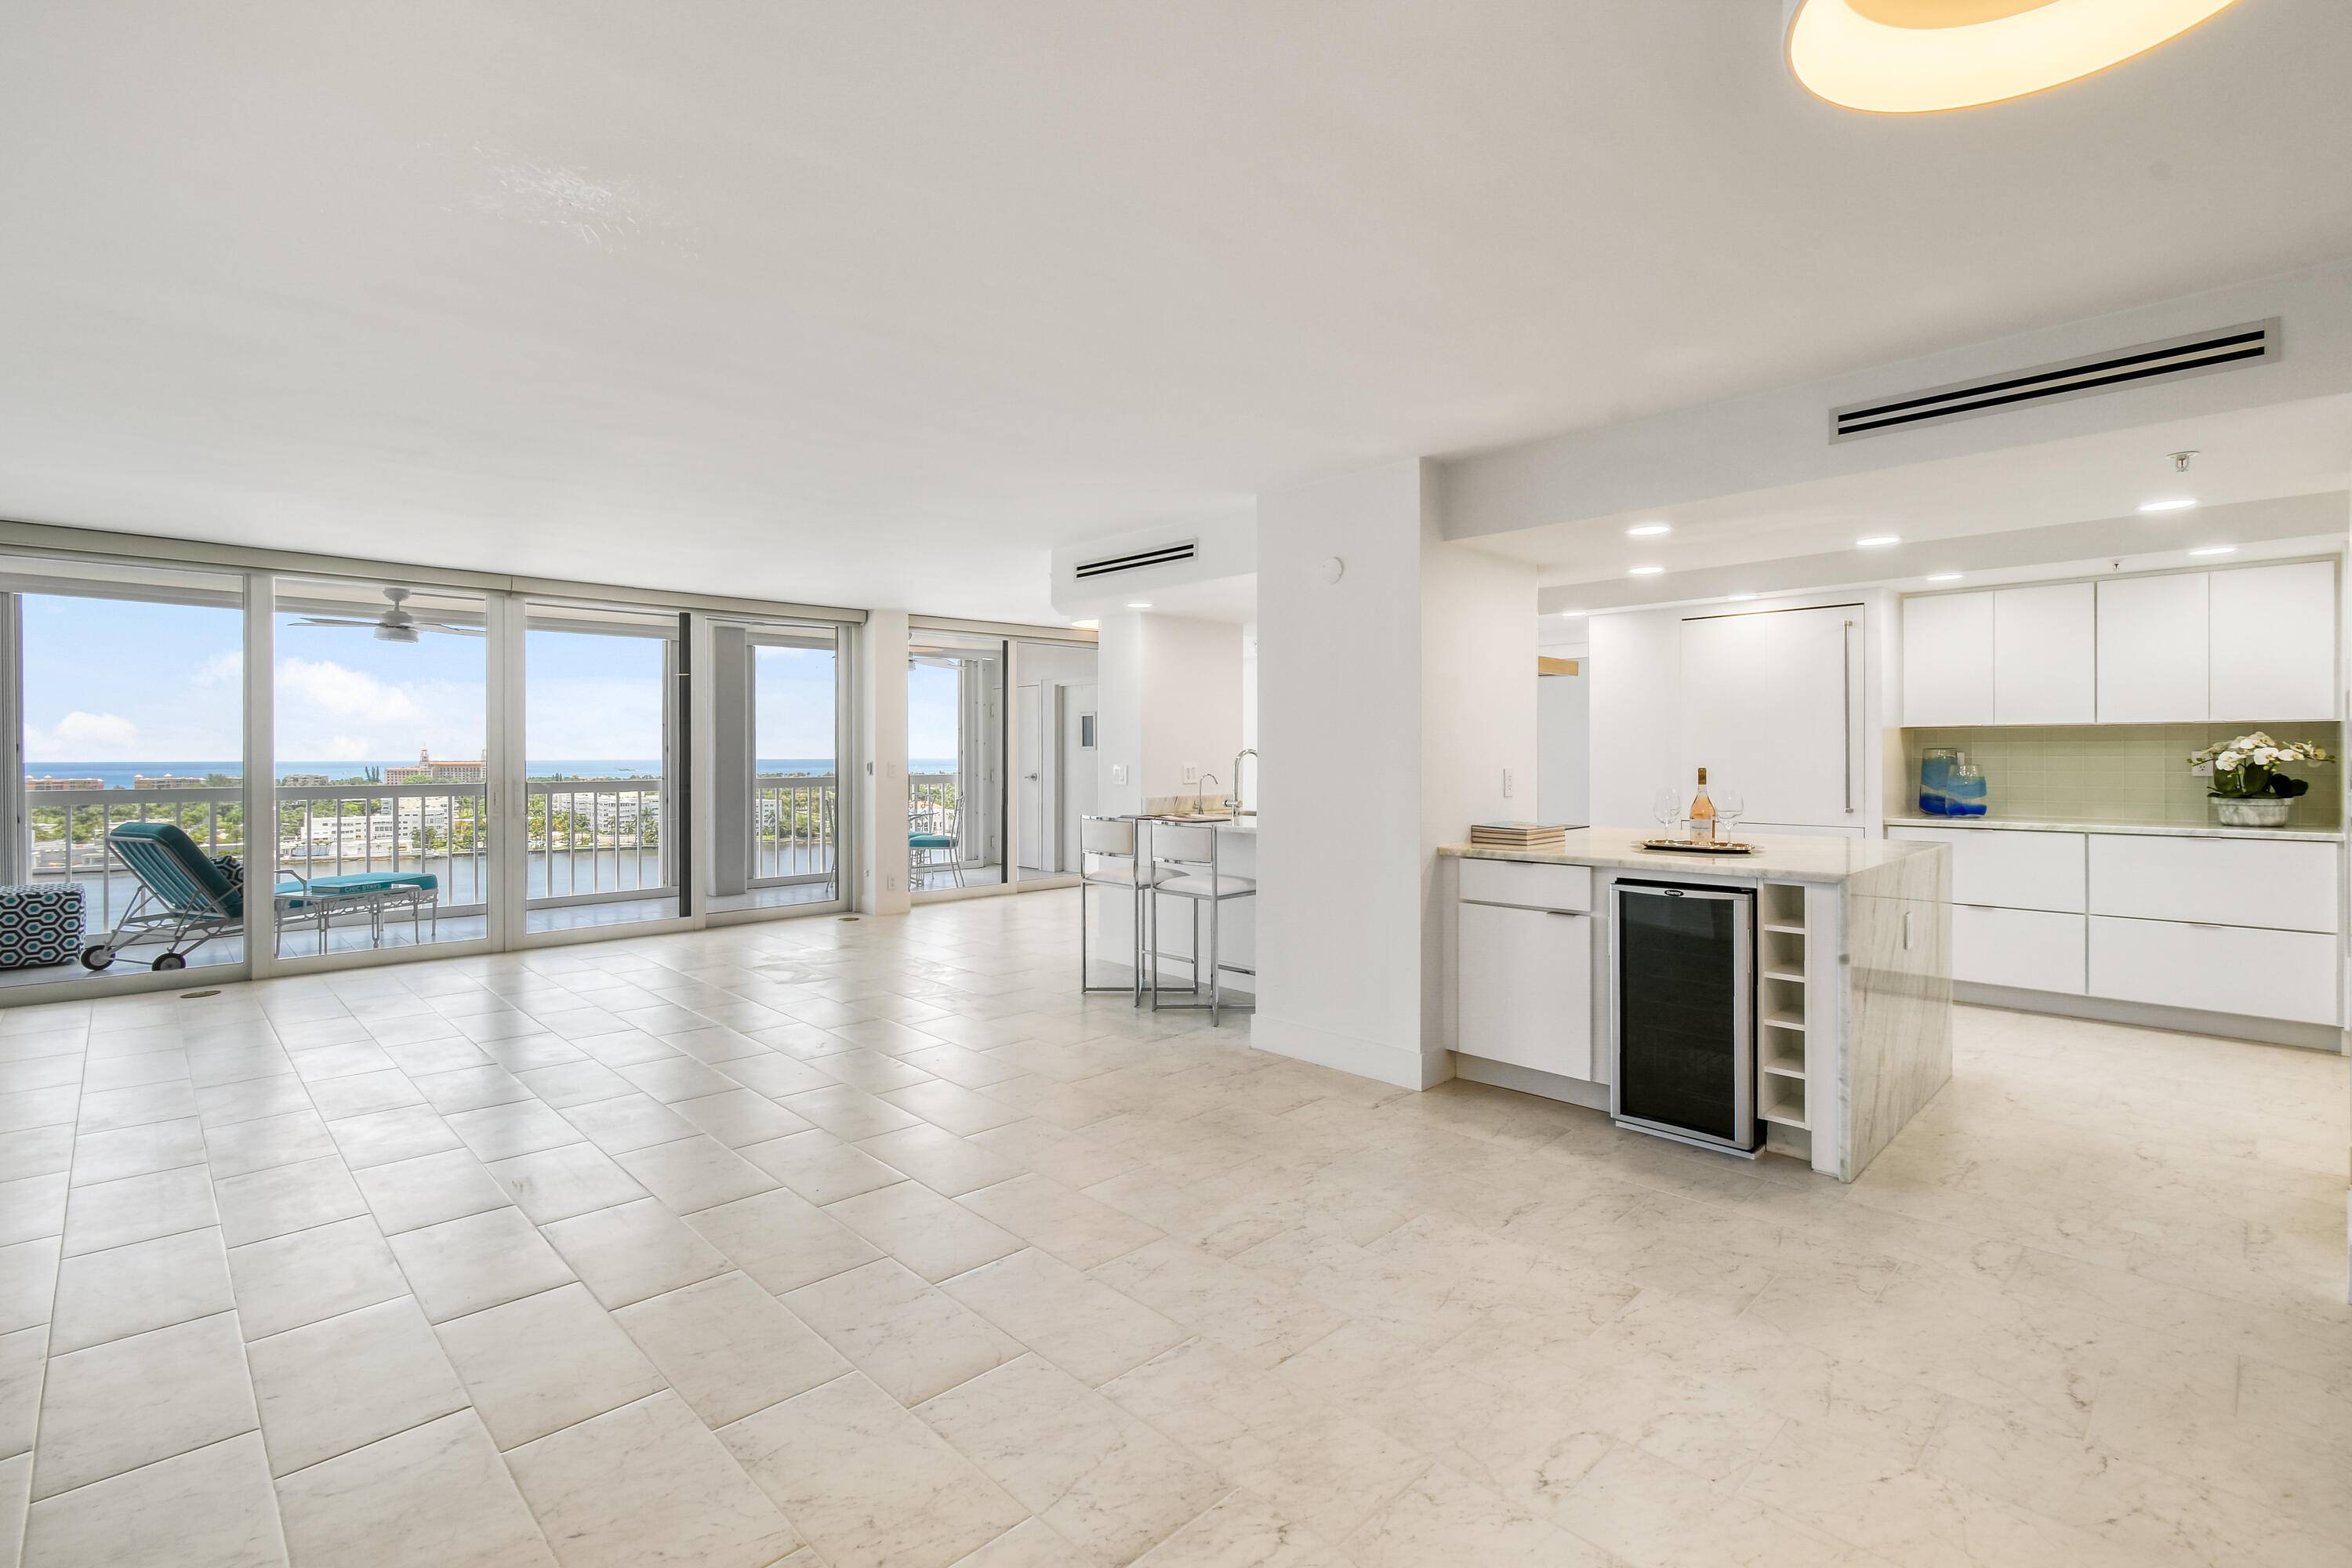 Beautifully renovated 2 Bedroom 2 Bath unit with spectacular views of the Intracoastal, Ocean, and Palm Beach.